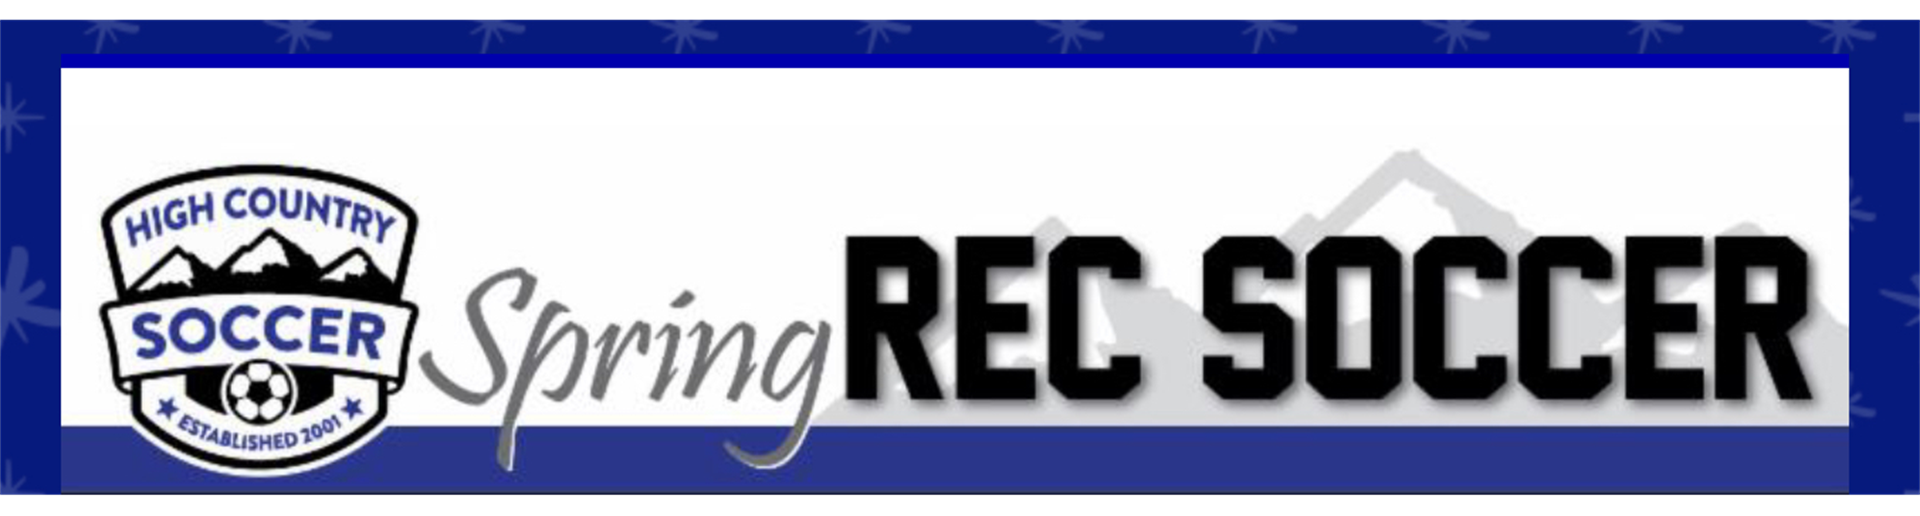 SPRING REC SCHEDULES POSTED!